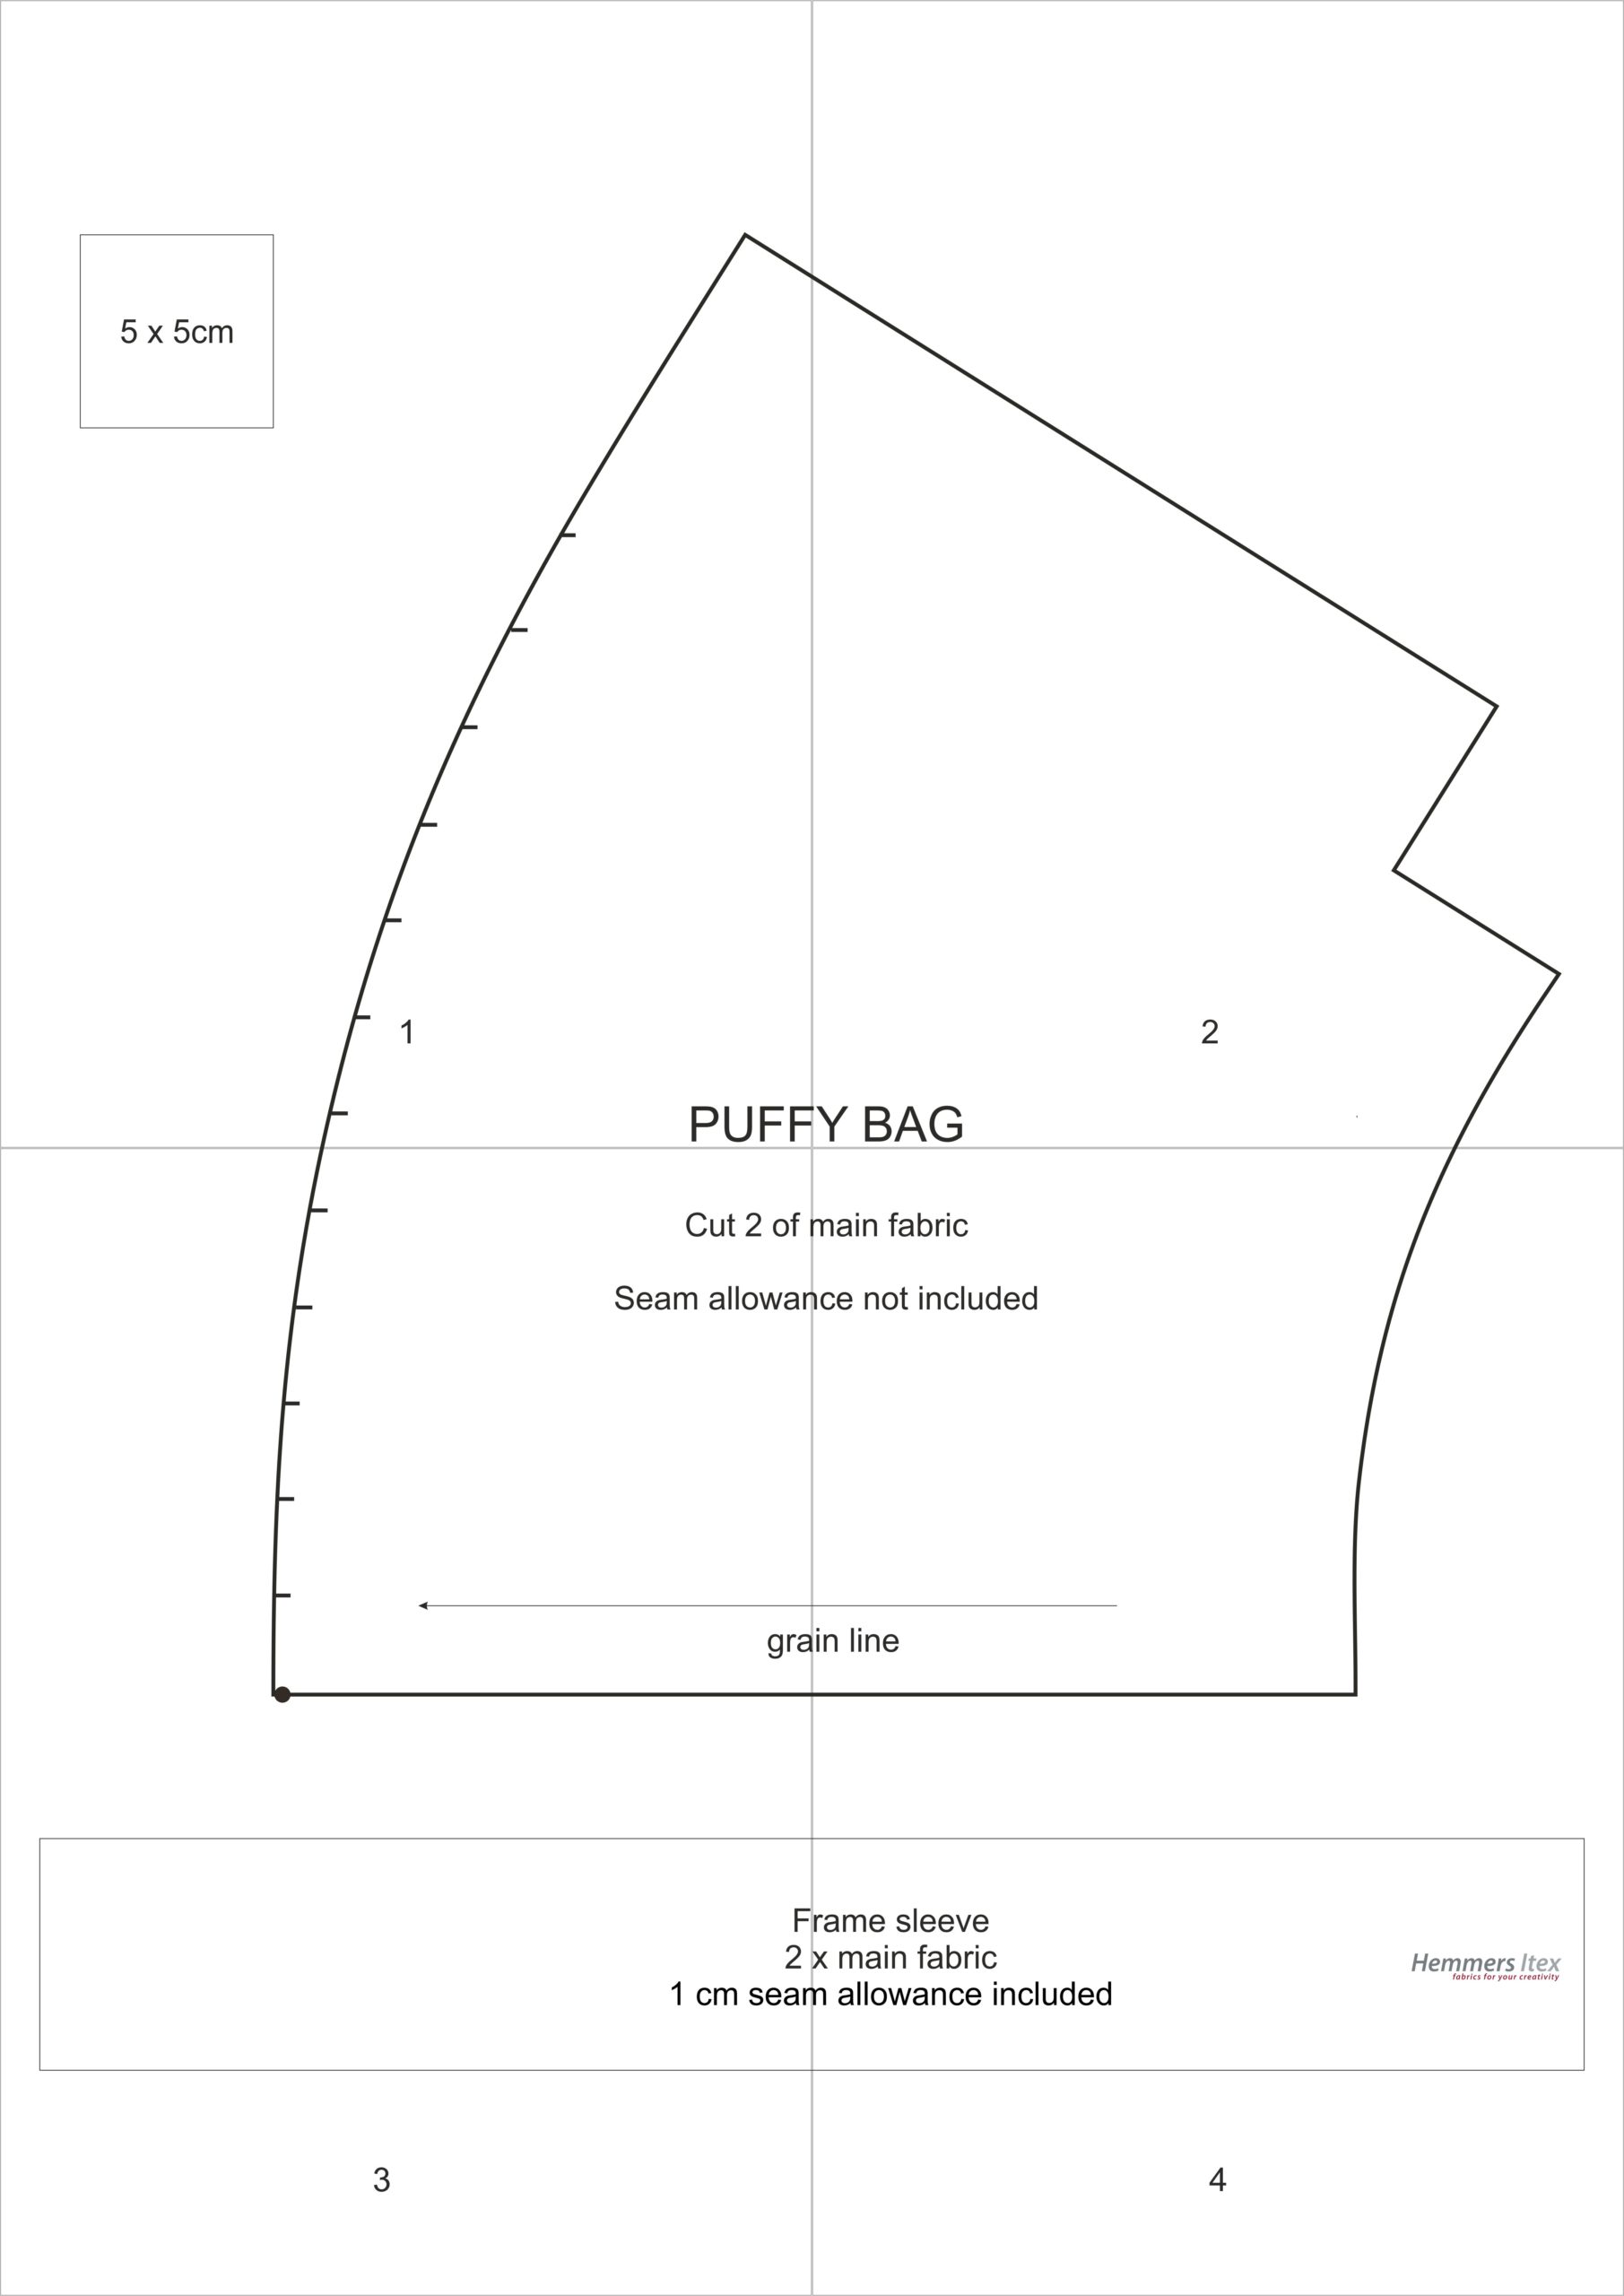 Puffy Bag - Sew your own designer bag - Pillow clutch sewing pattern